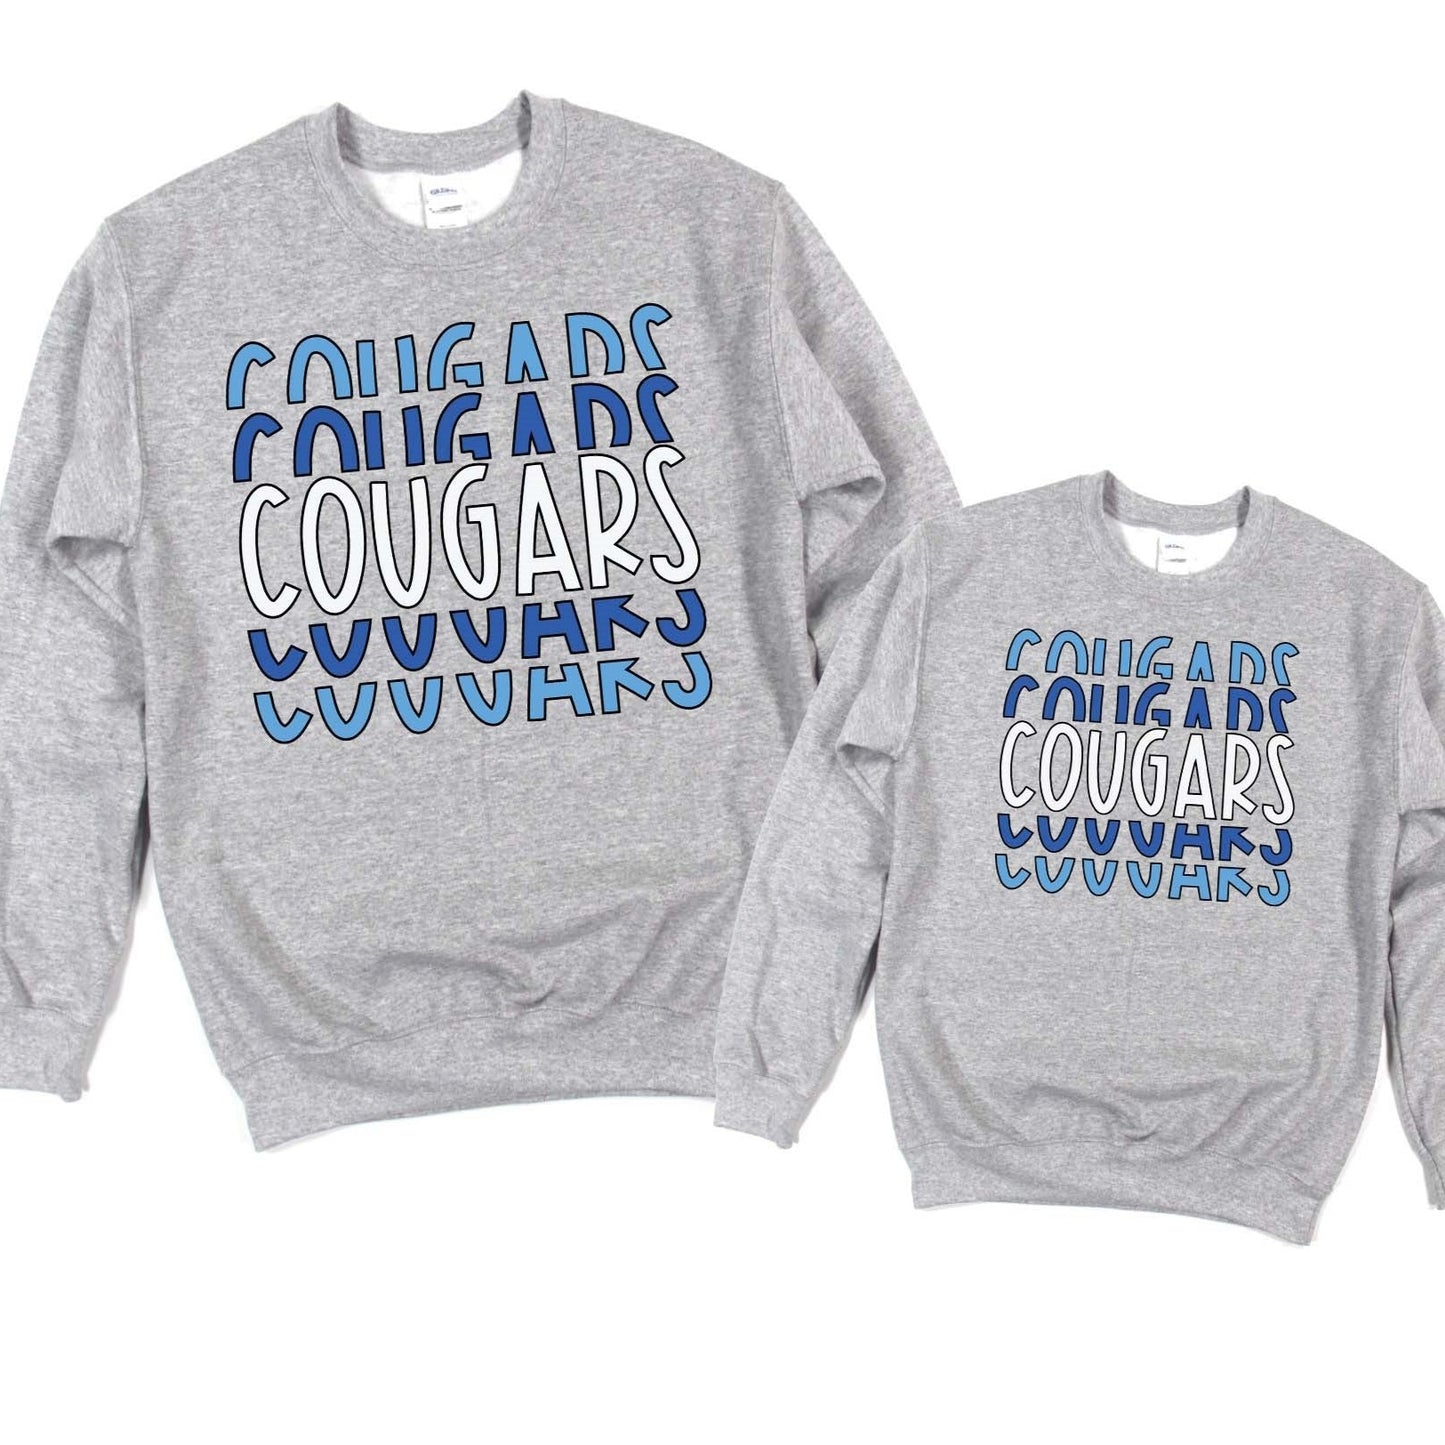 Monticello Cougars Stacked Design: Tees, Crews, & Hoodies: Youth & Adult Sizes